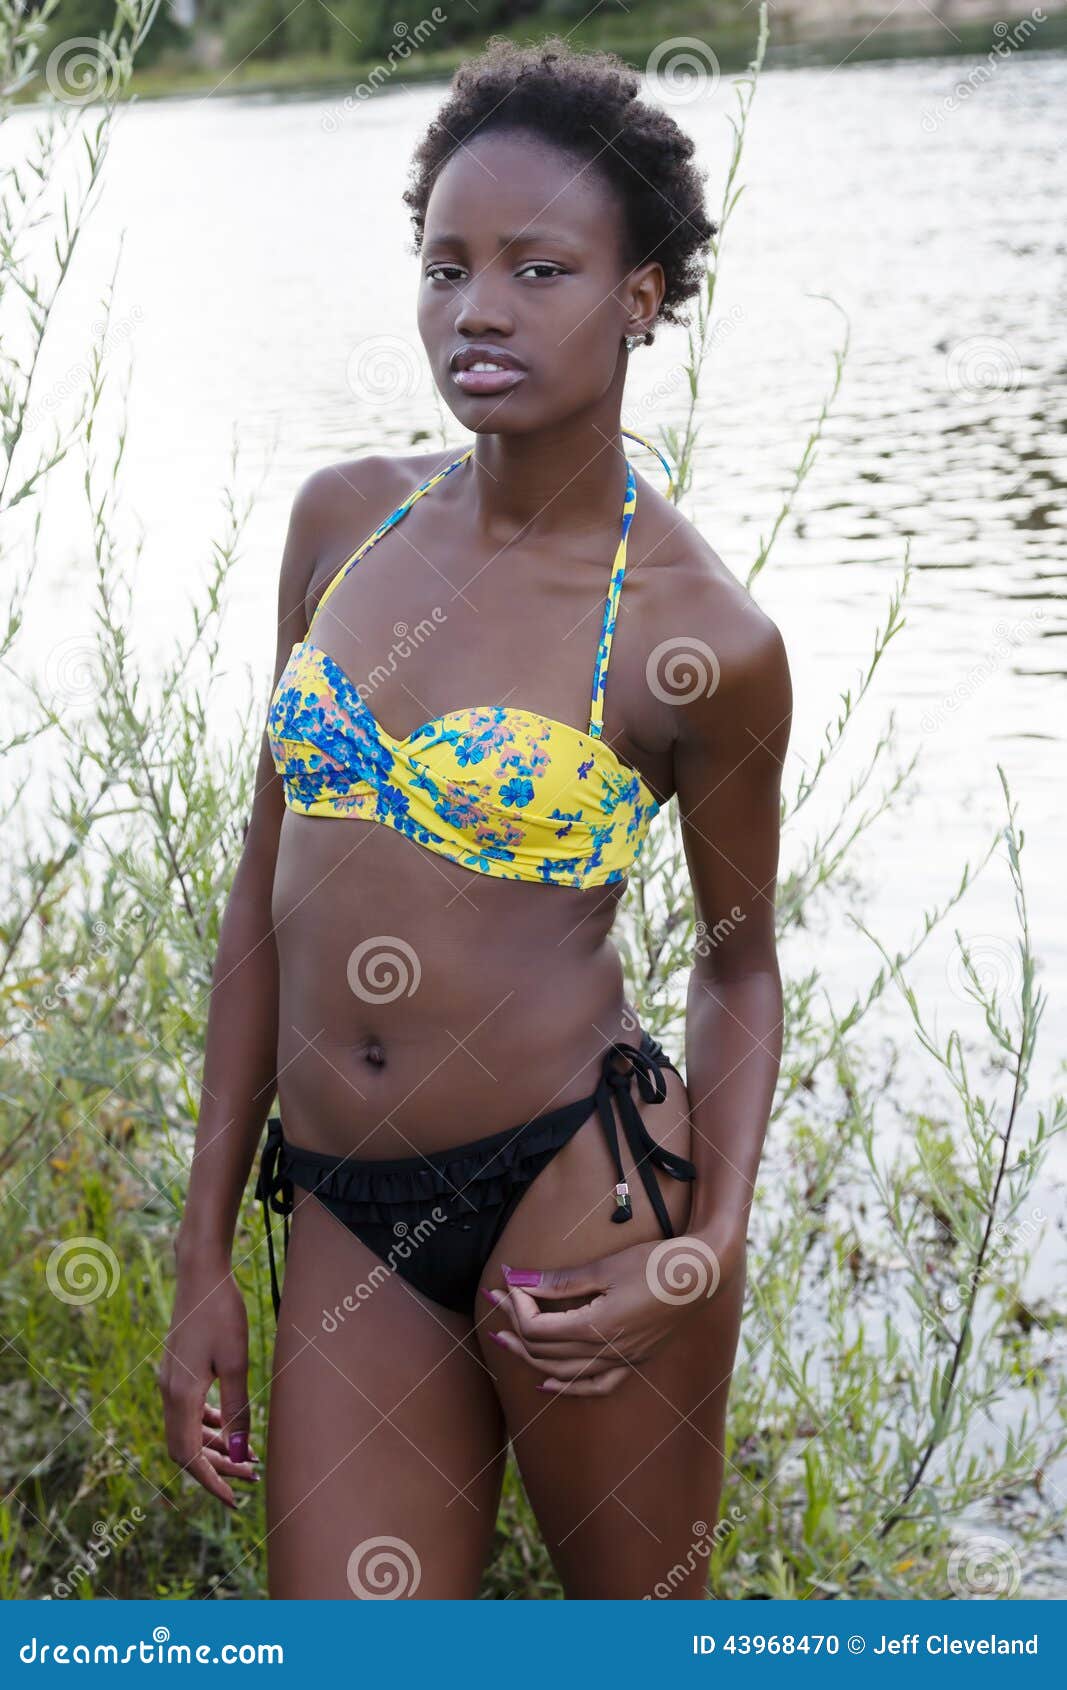 Skinny Black Teen Girl Bathing Suit by River Stock Photo - Image of girl,  woman: 43968470